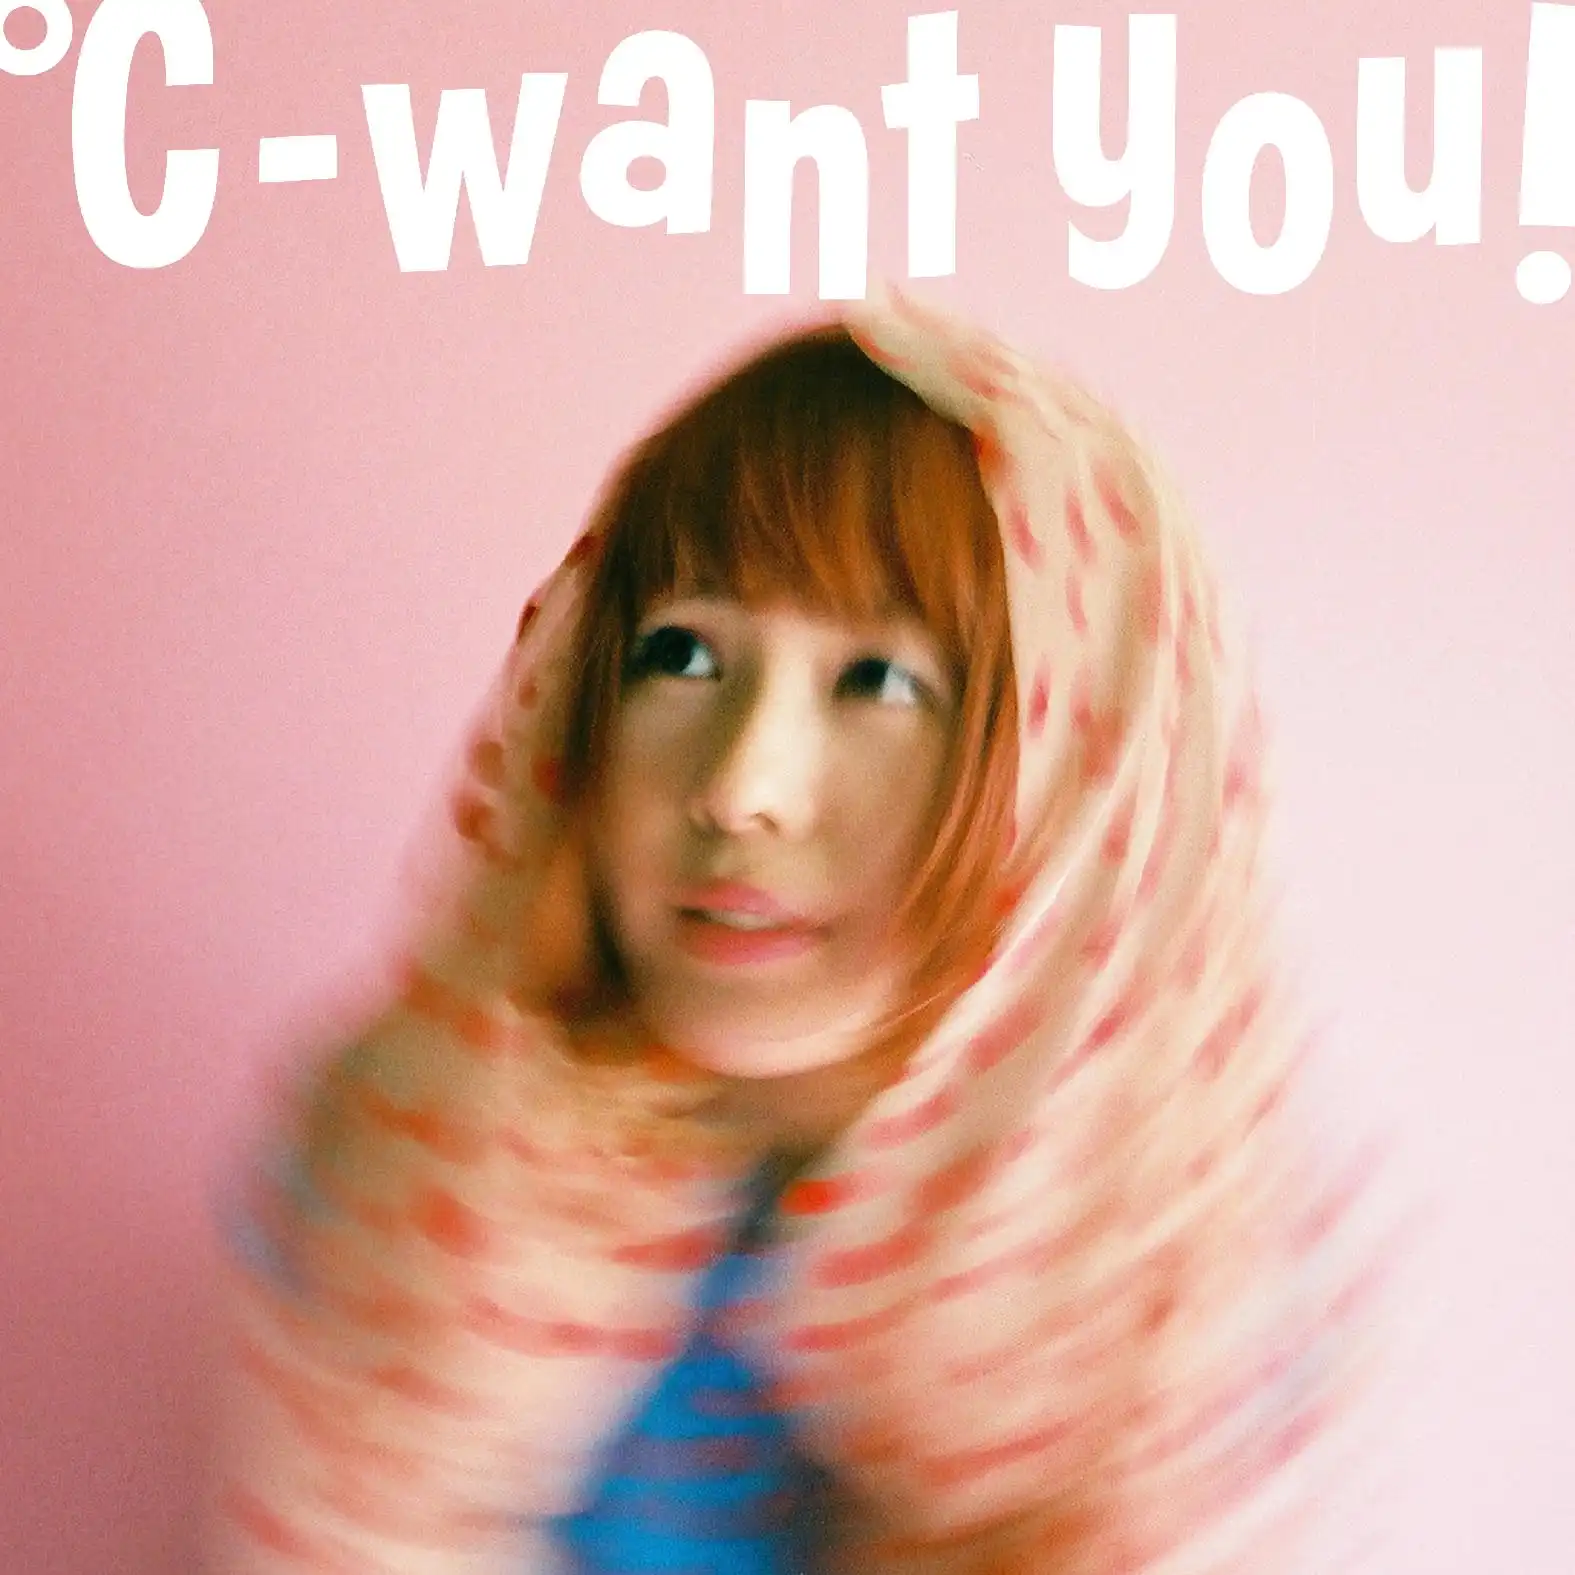 ℃-WANT YOU! / SAME